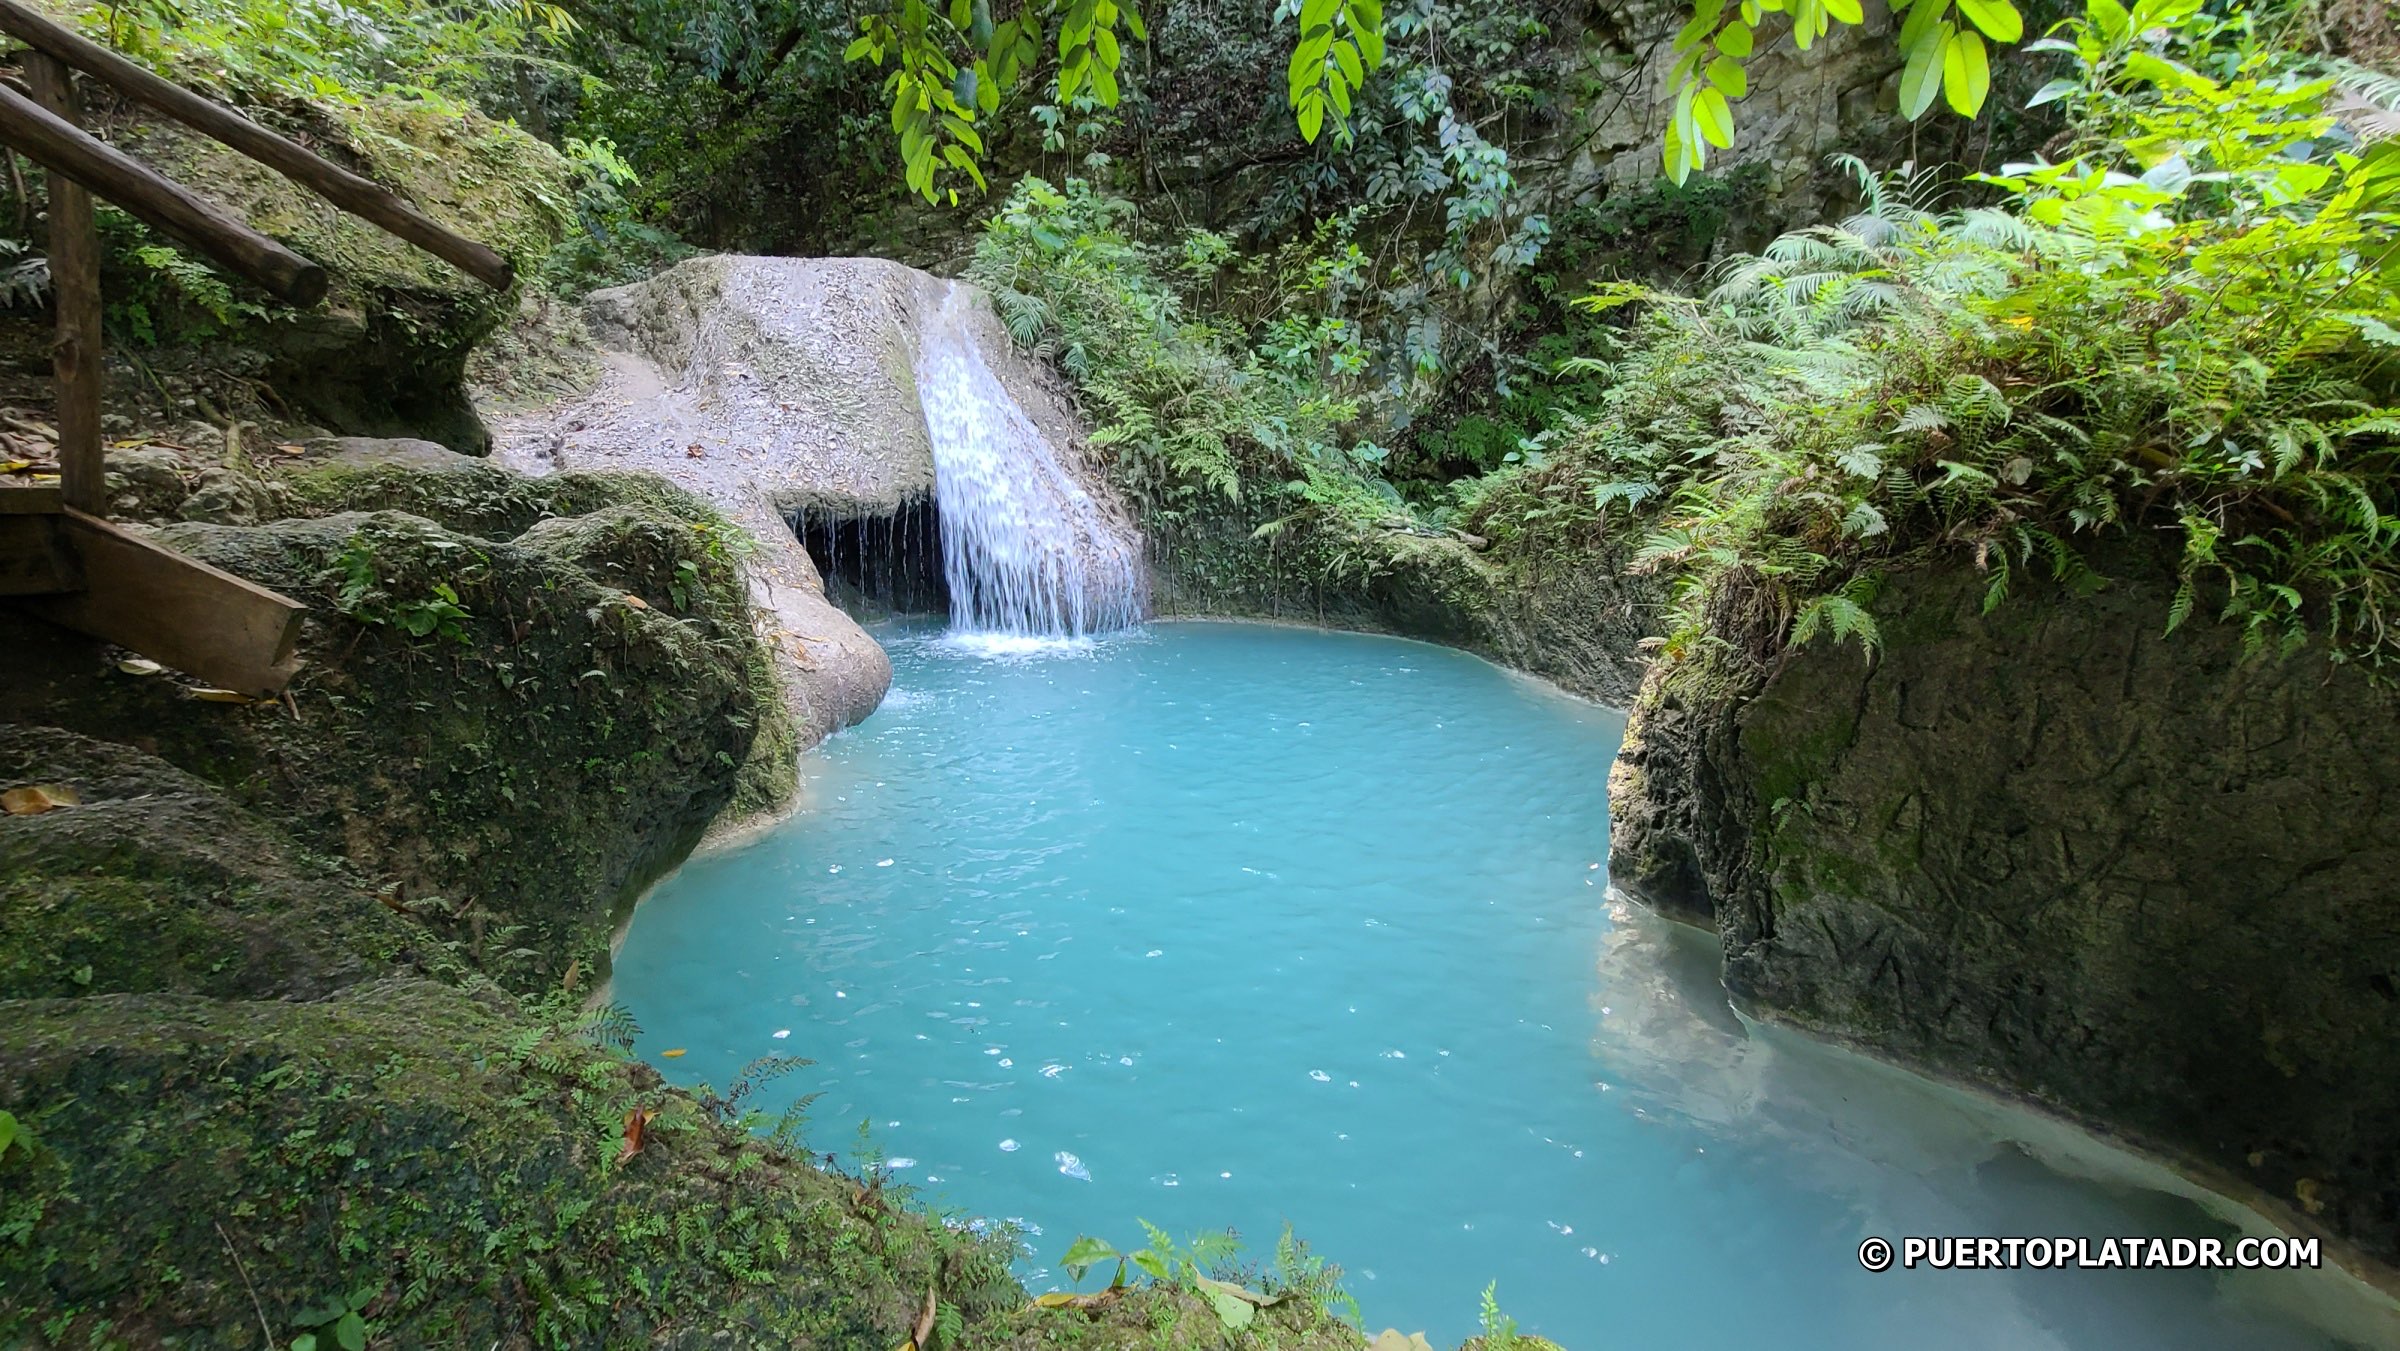 The Charco is part of the Tubagua tours